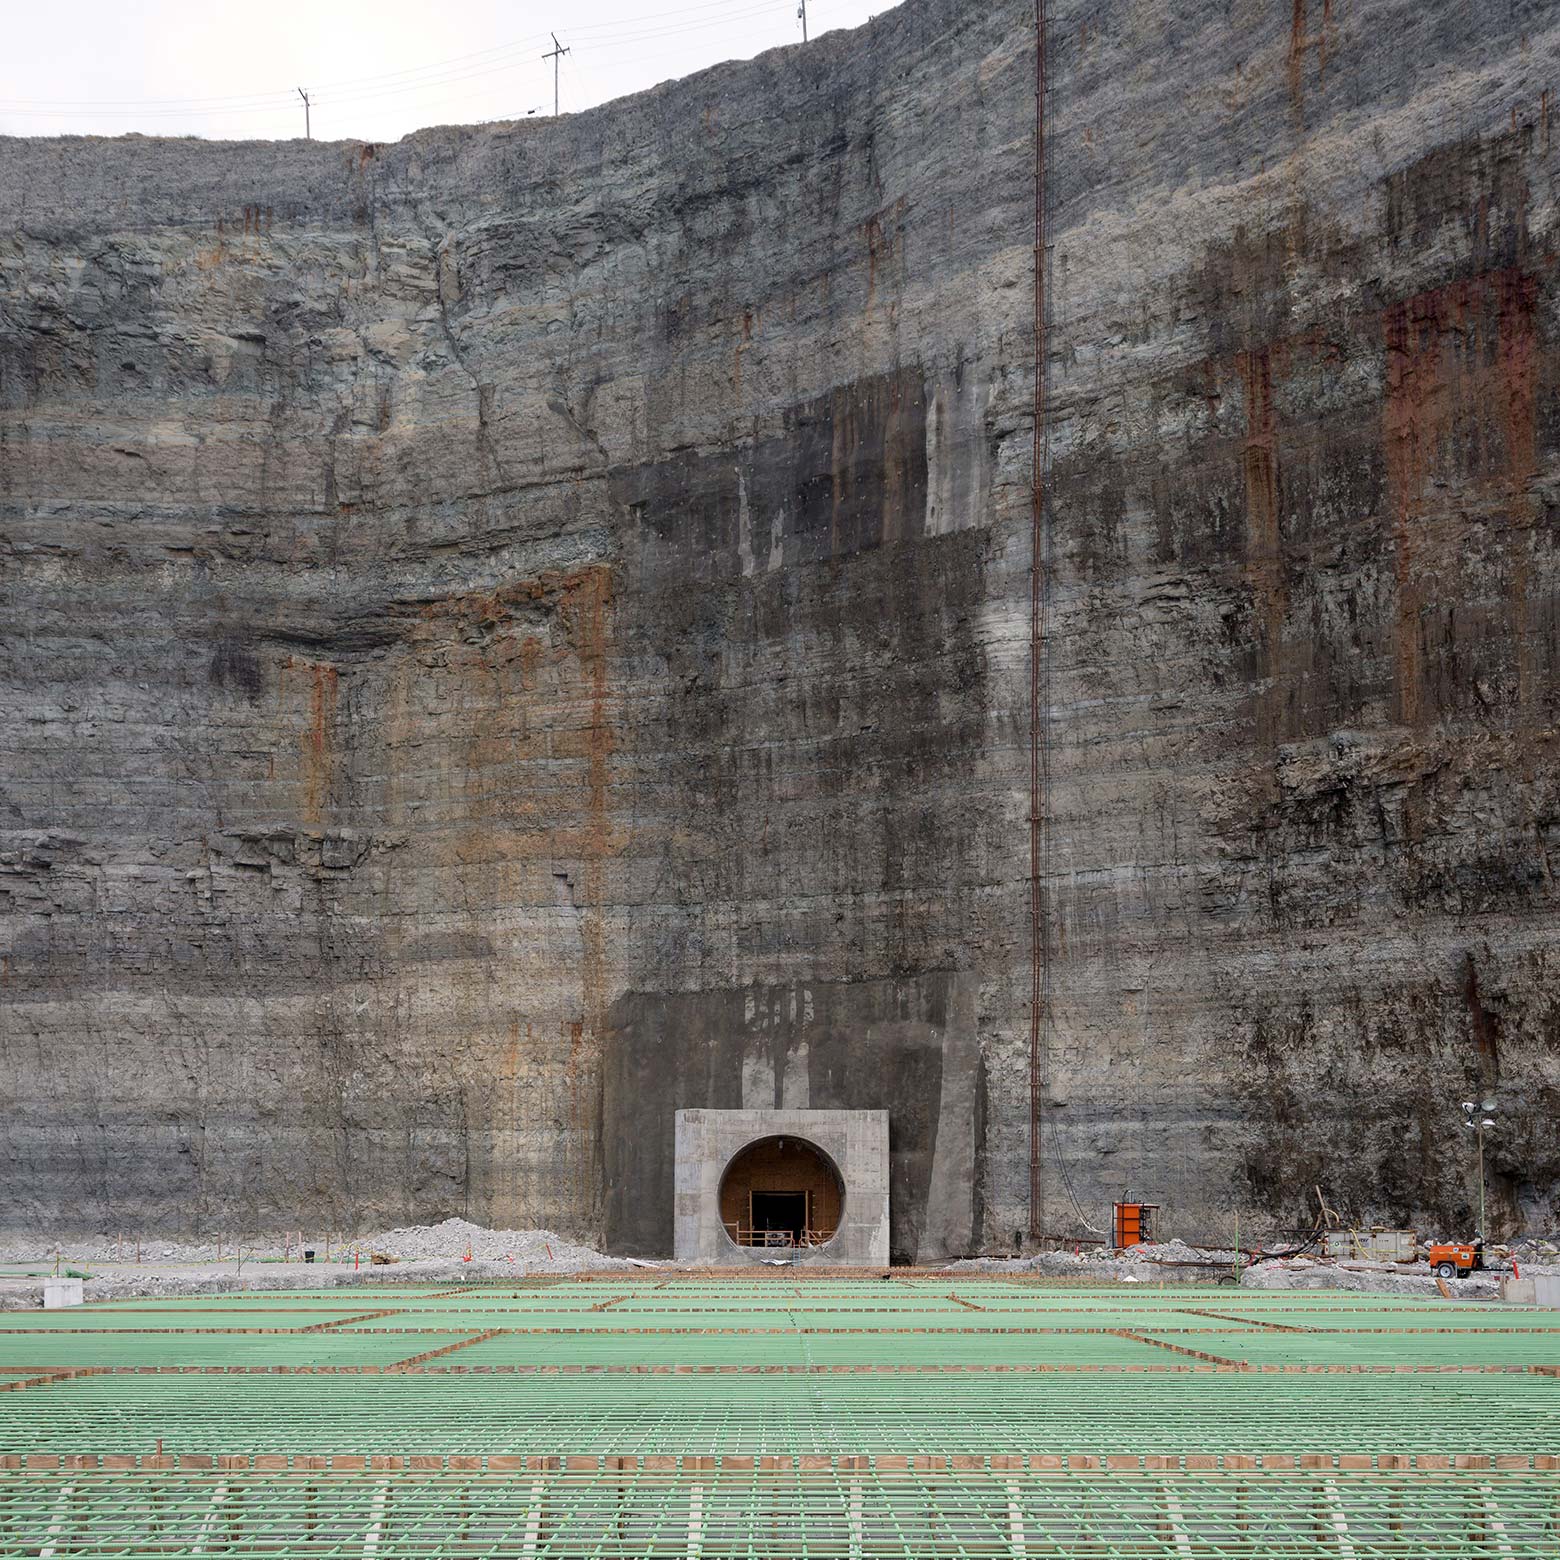 Construction nears completion where the Deep Tunnel accesses the Thornton Reservoir.